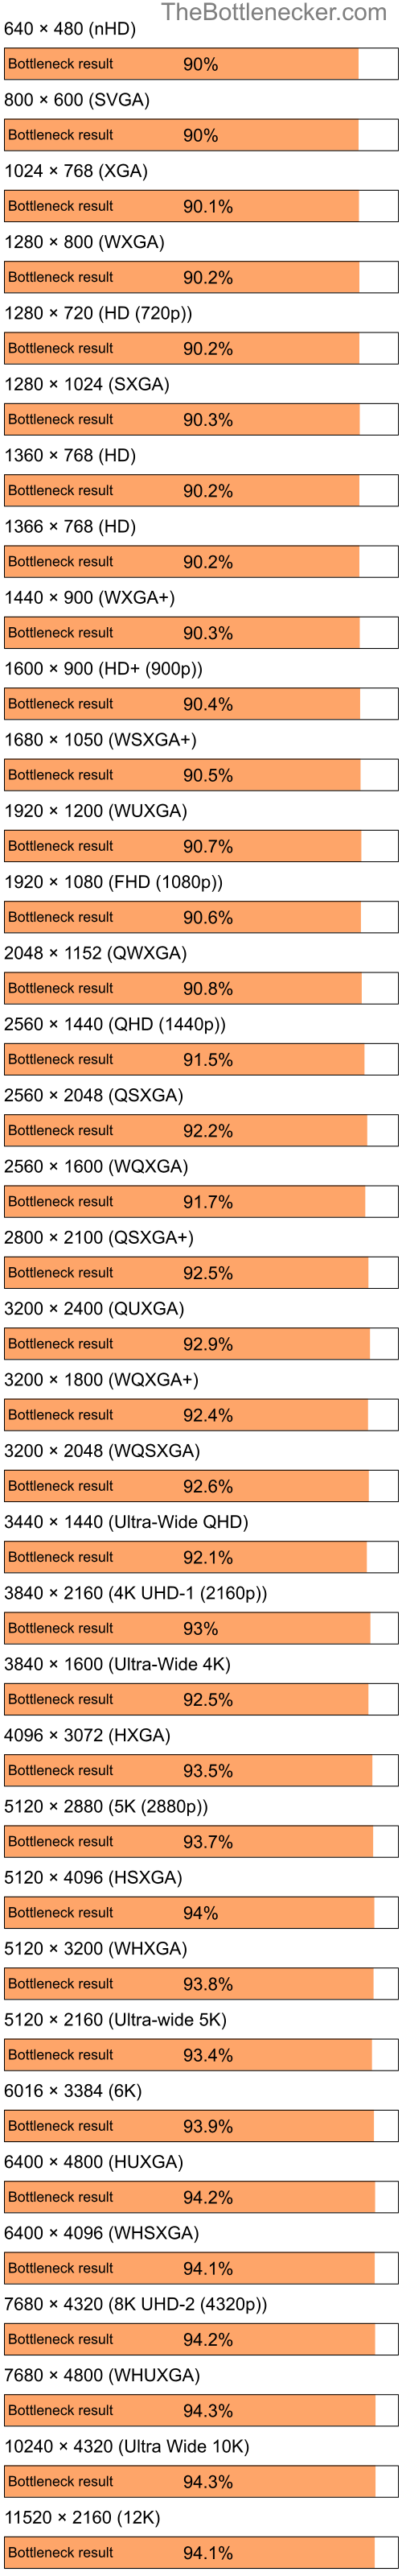 Bottleneck results by resolution for Intel Pentium 4 and NVIDIA GeForce4 420 Go 32M in General Tasks